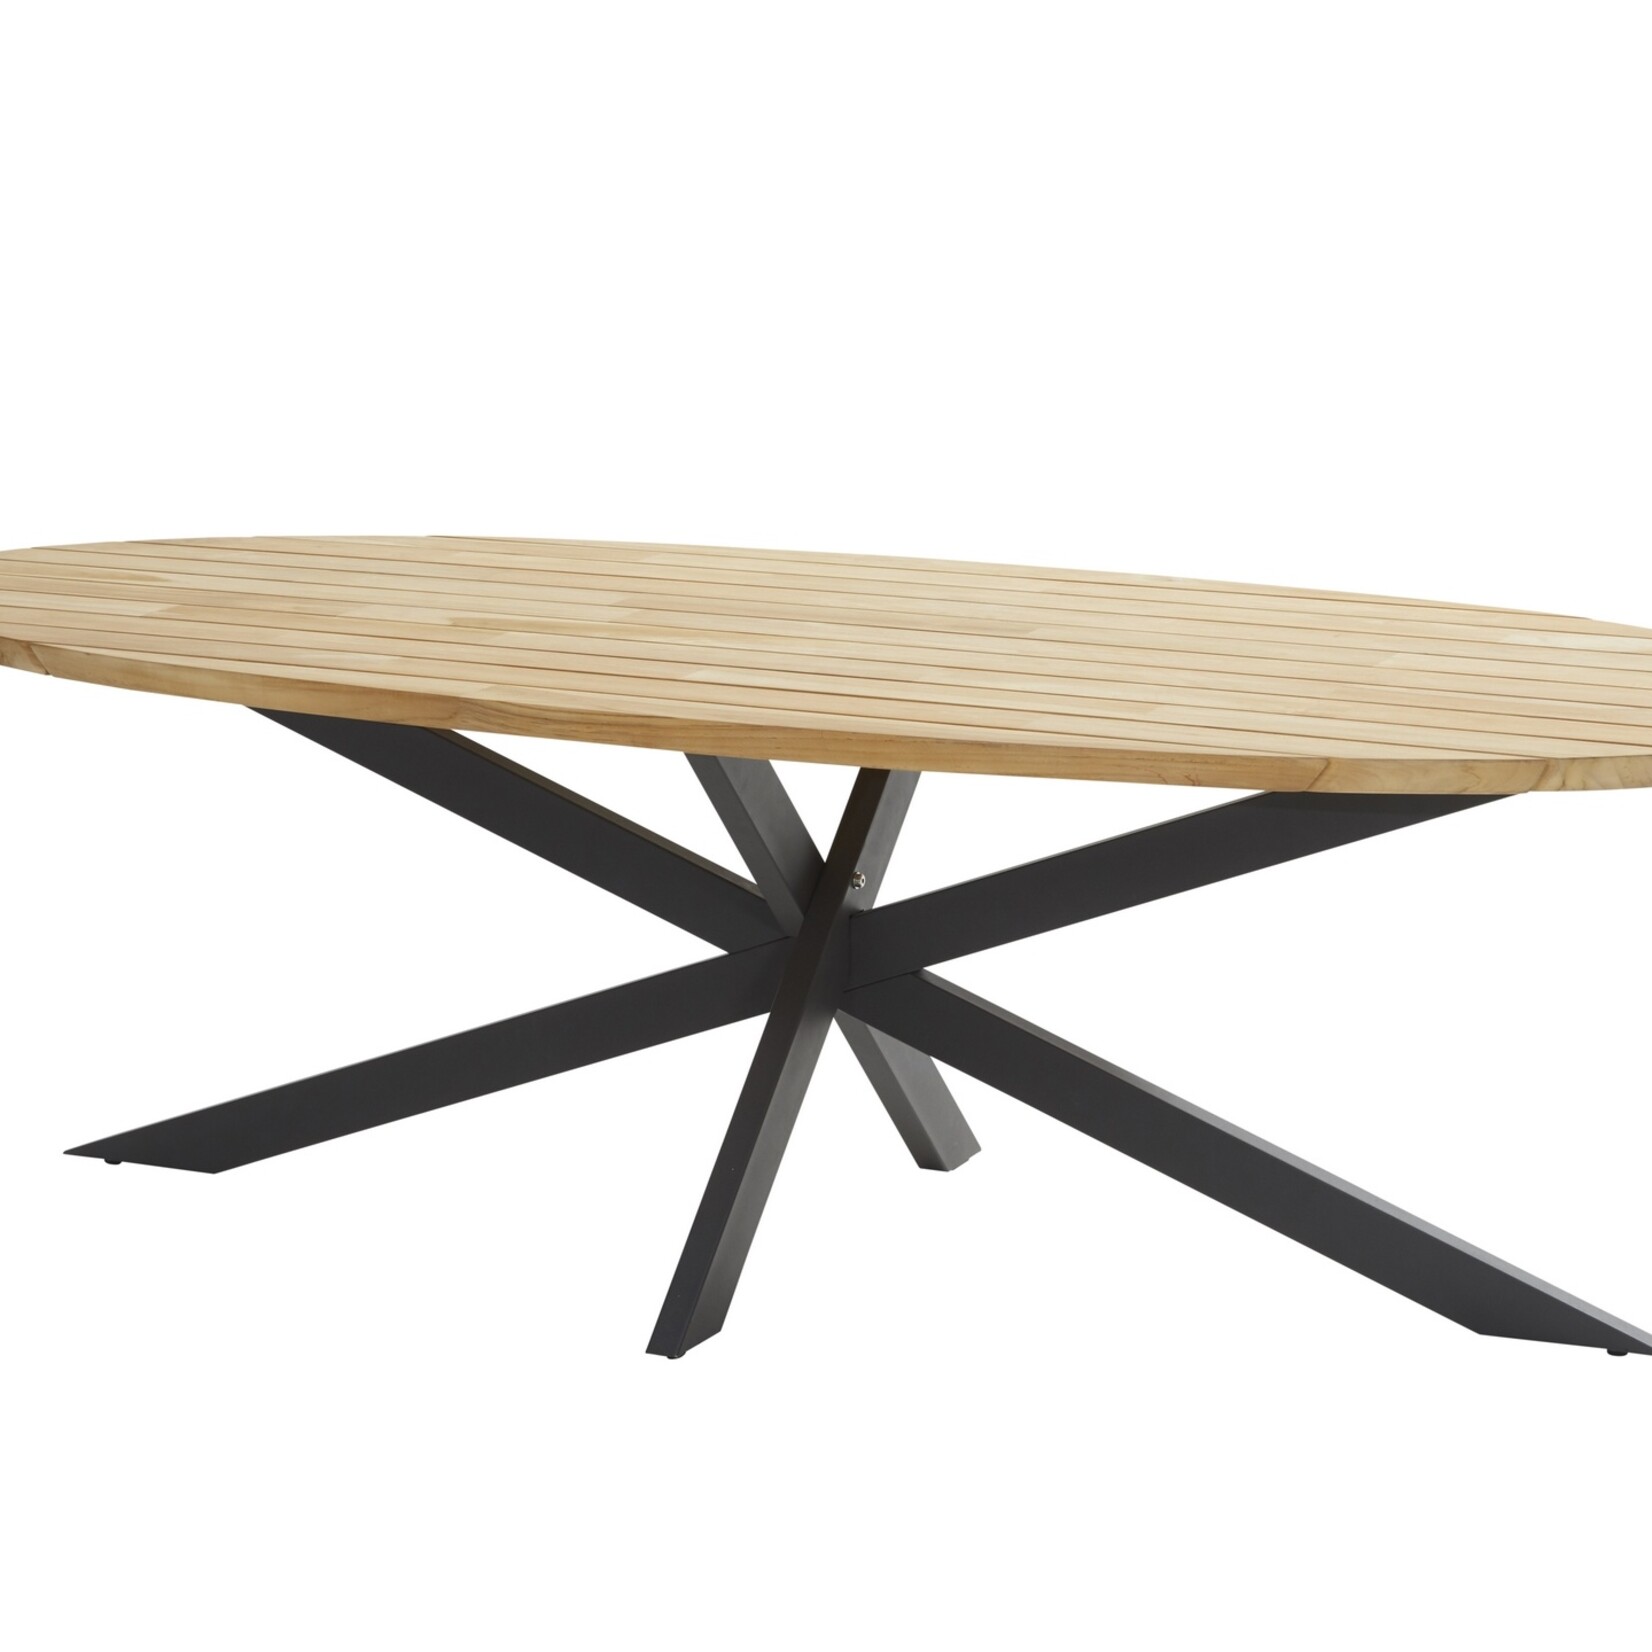 4SO 4SO Prado dining table ellips 240 X 115 cm Natural teak  top with anthracite legs